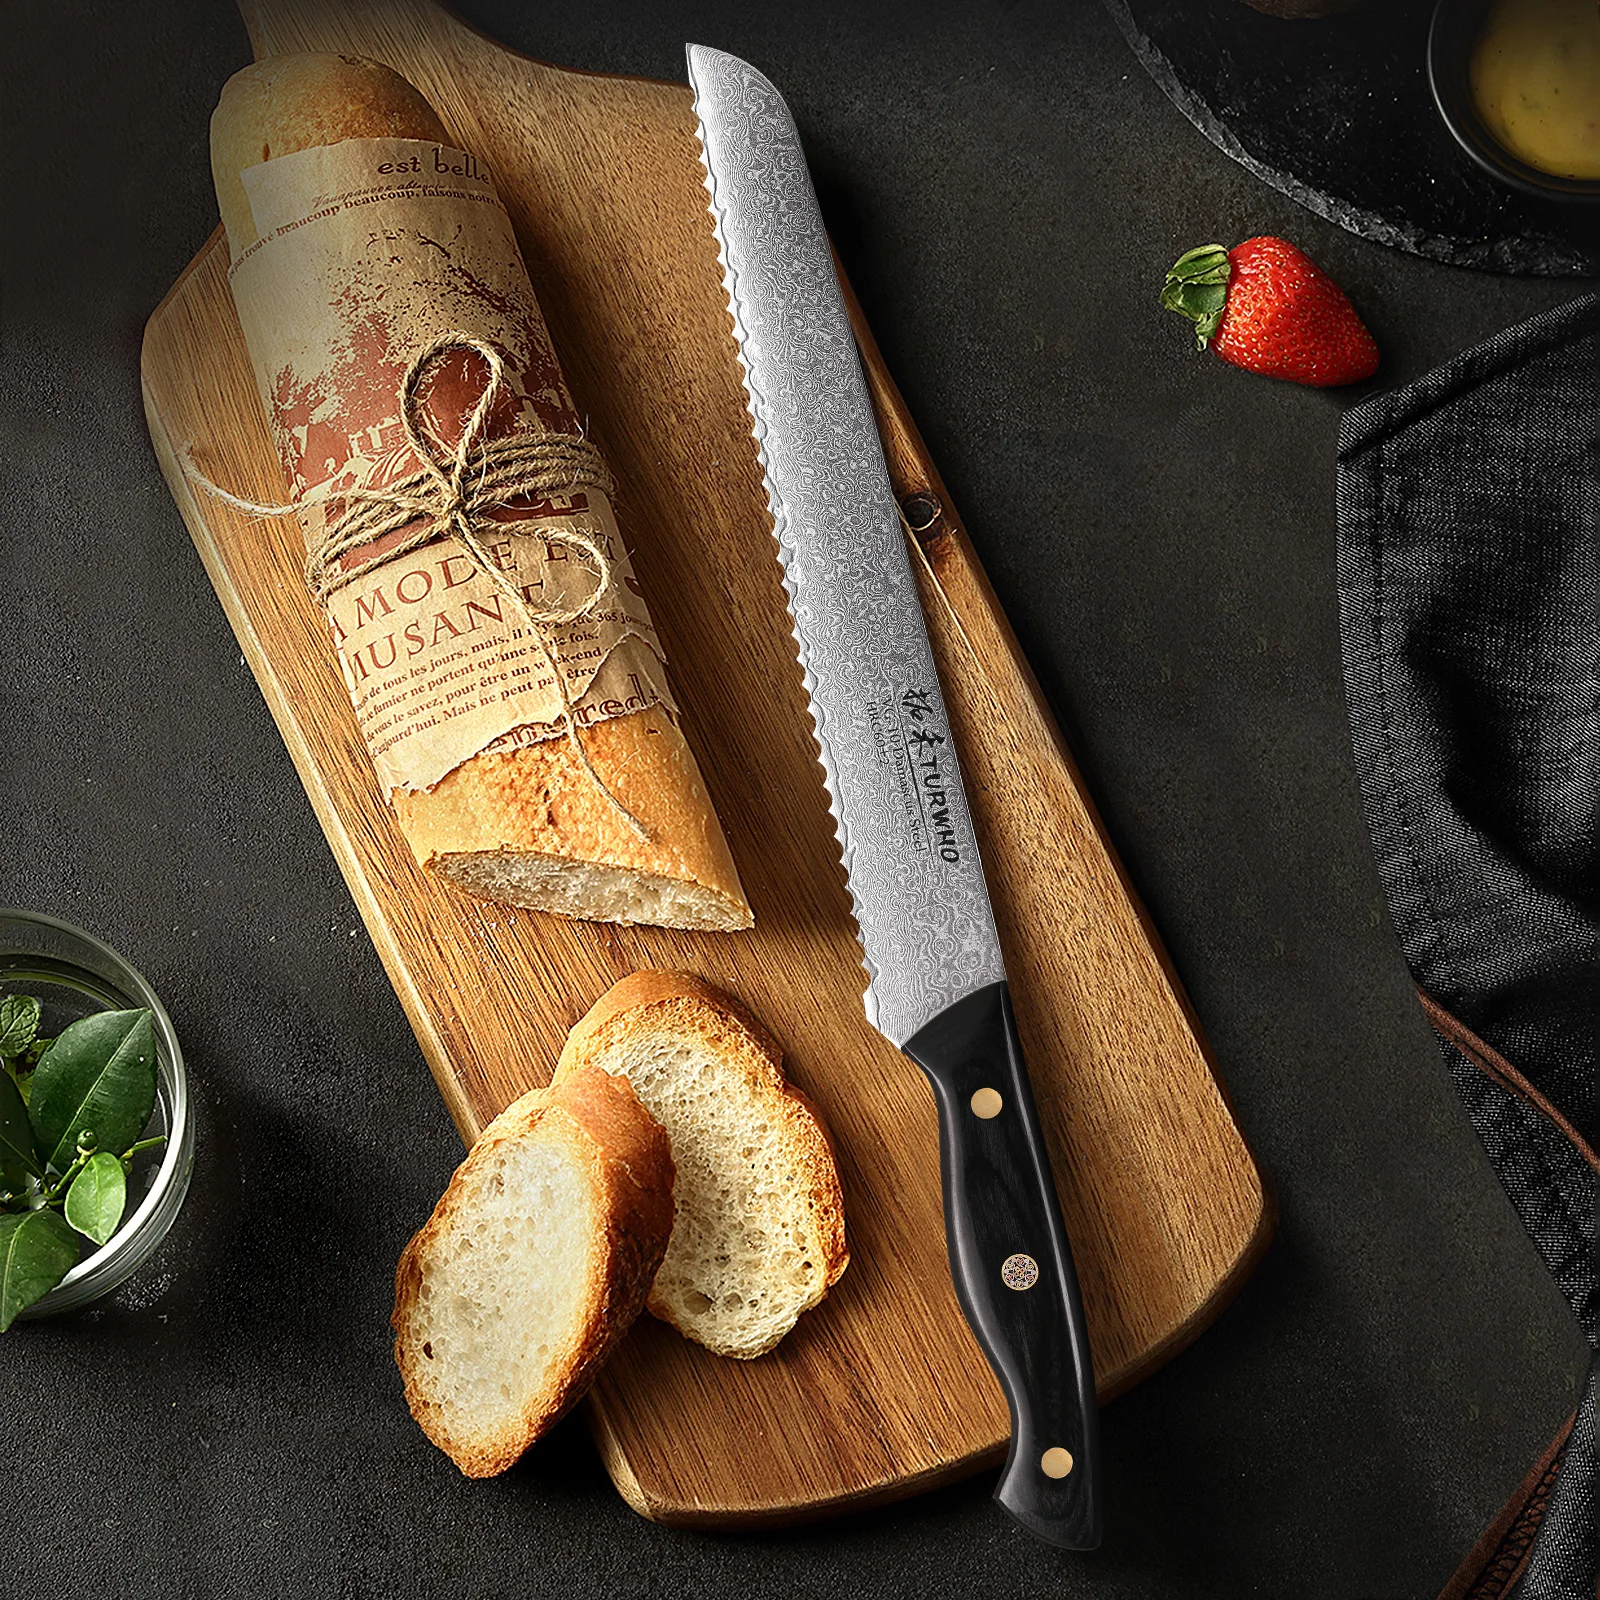 https://ae01.alicdn.com/kf/S00851d411daf47e9a53ed6fd9955247eL/TURWHO-9-Inch-Professional-Bread-Knife-67-Layer-Damascus-Steel-Kitchen-Chef-Knives-VG10-Core-Serrated.jpg